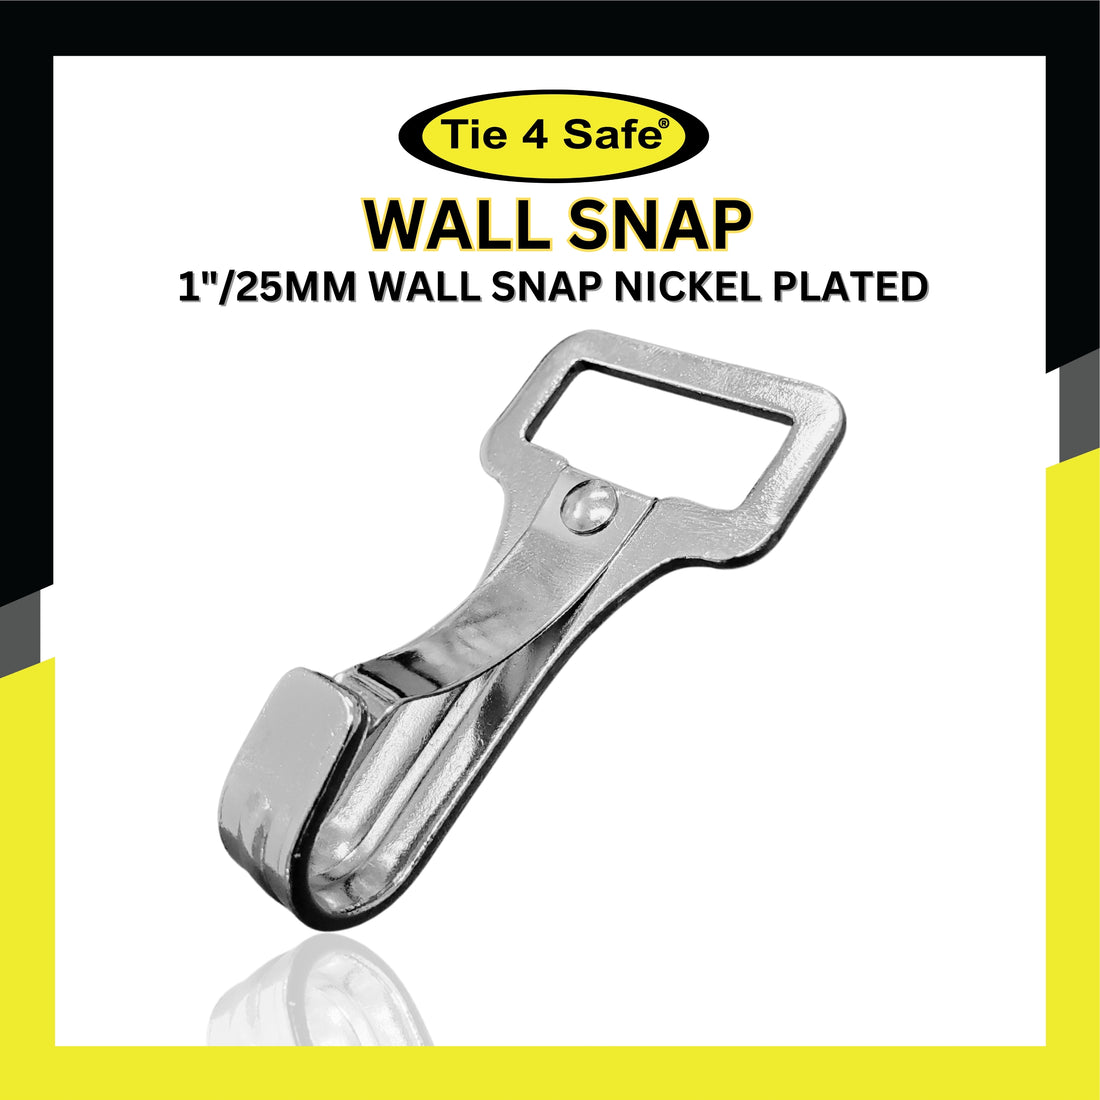 1"/25mm Wall Snap Nickel Plated